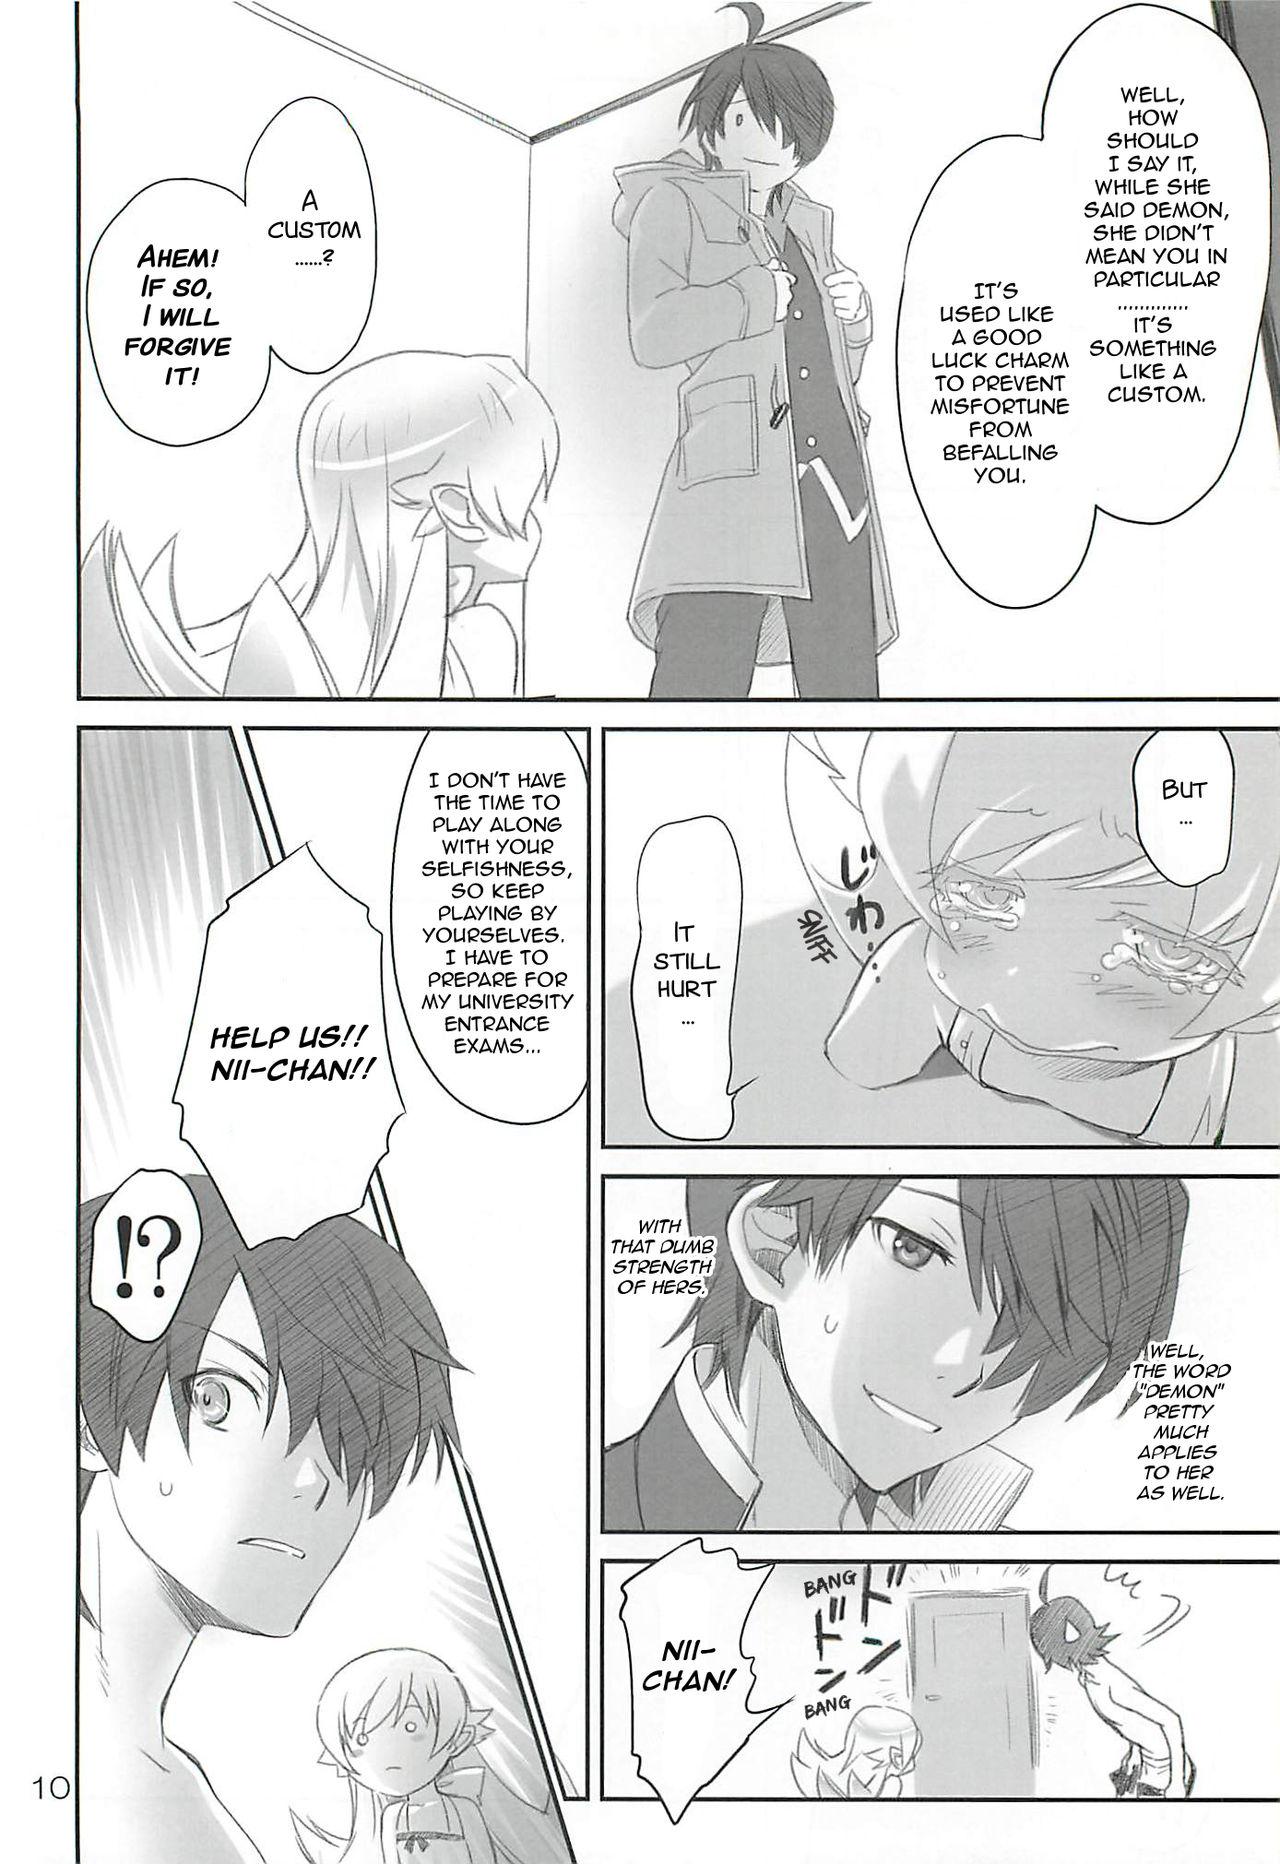 Ex Gf Brother and Sisters - Bakemonogatari Top - Page 9